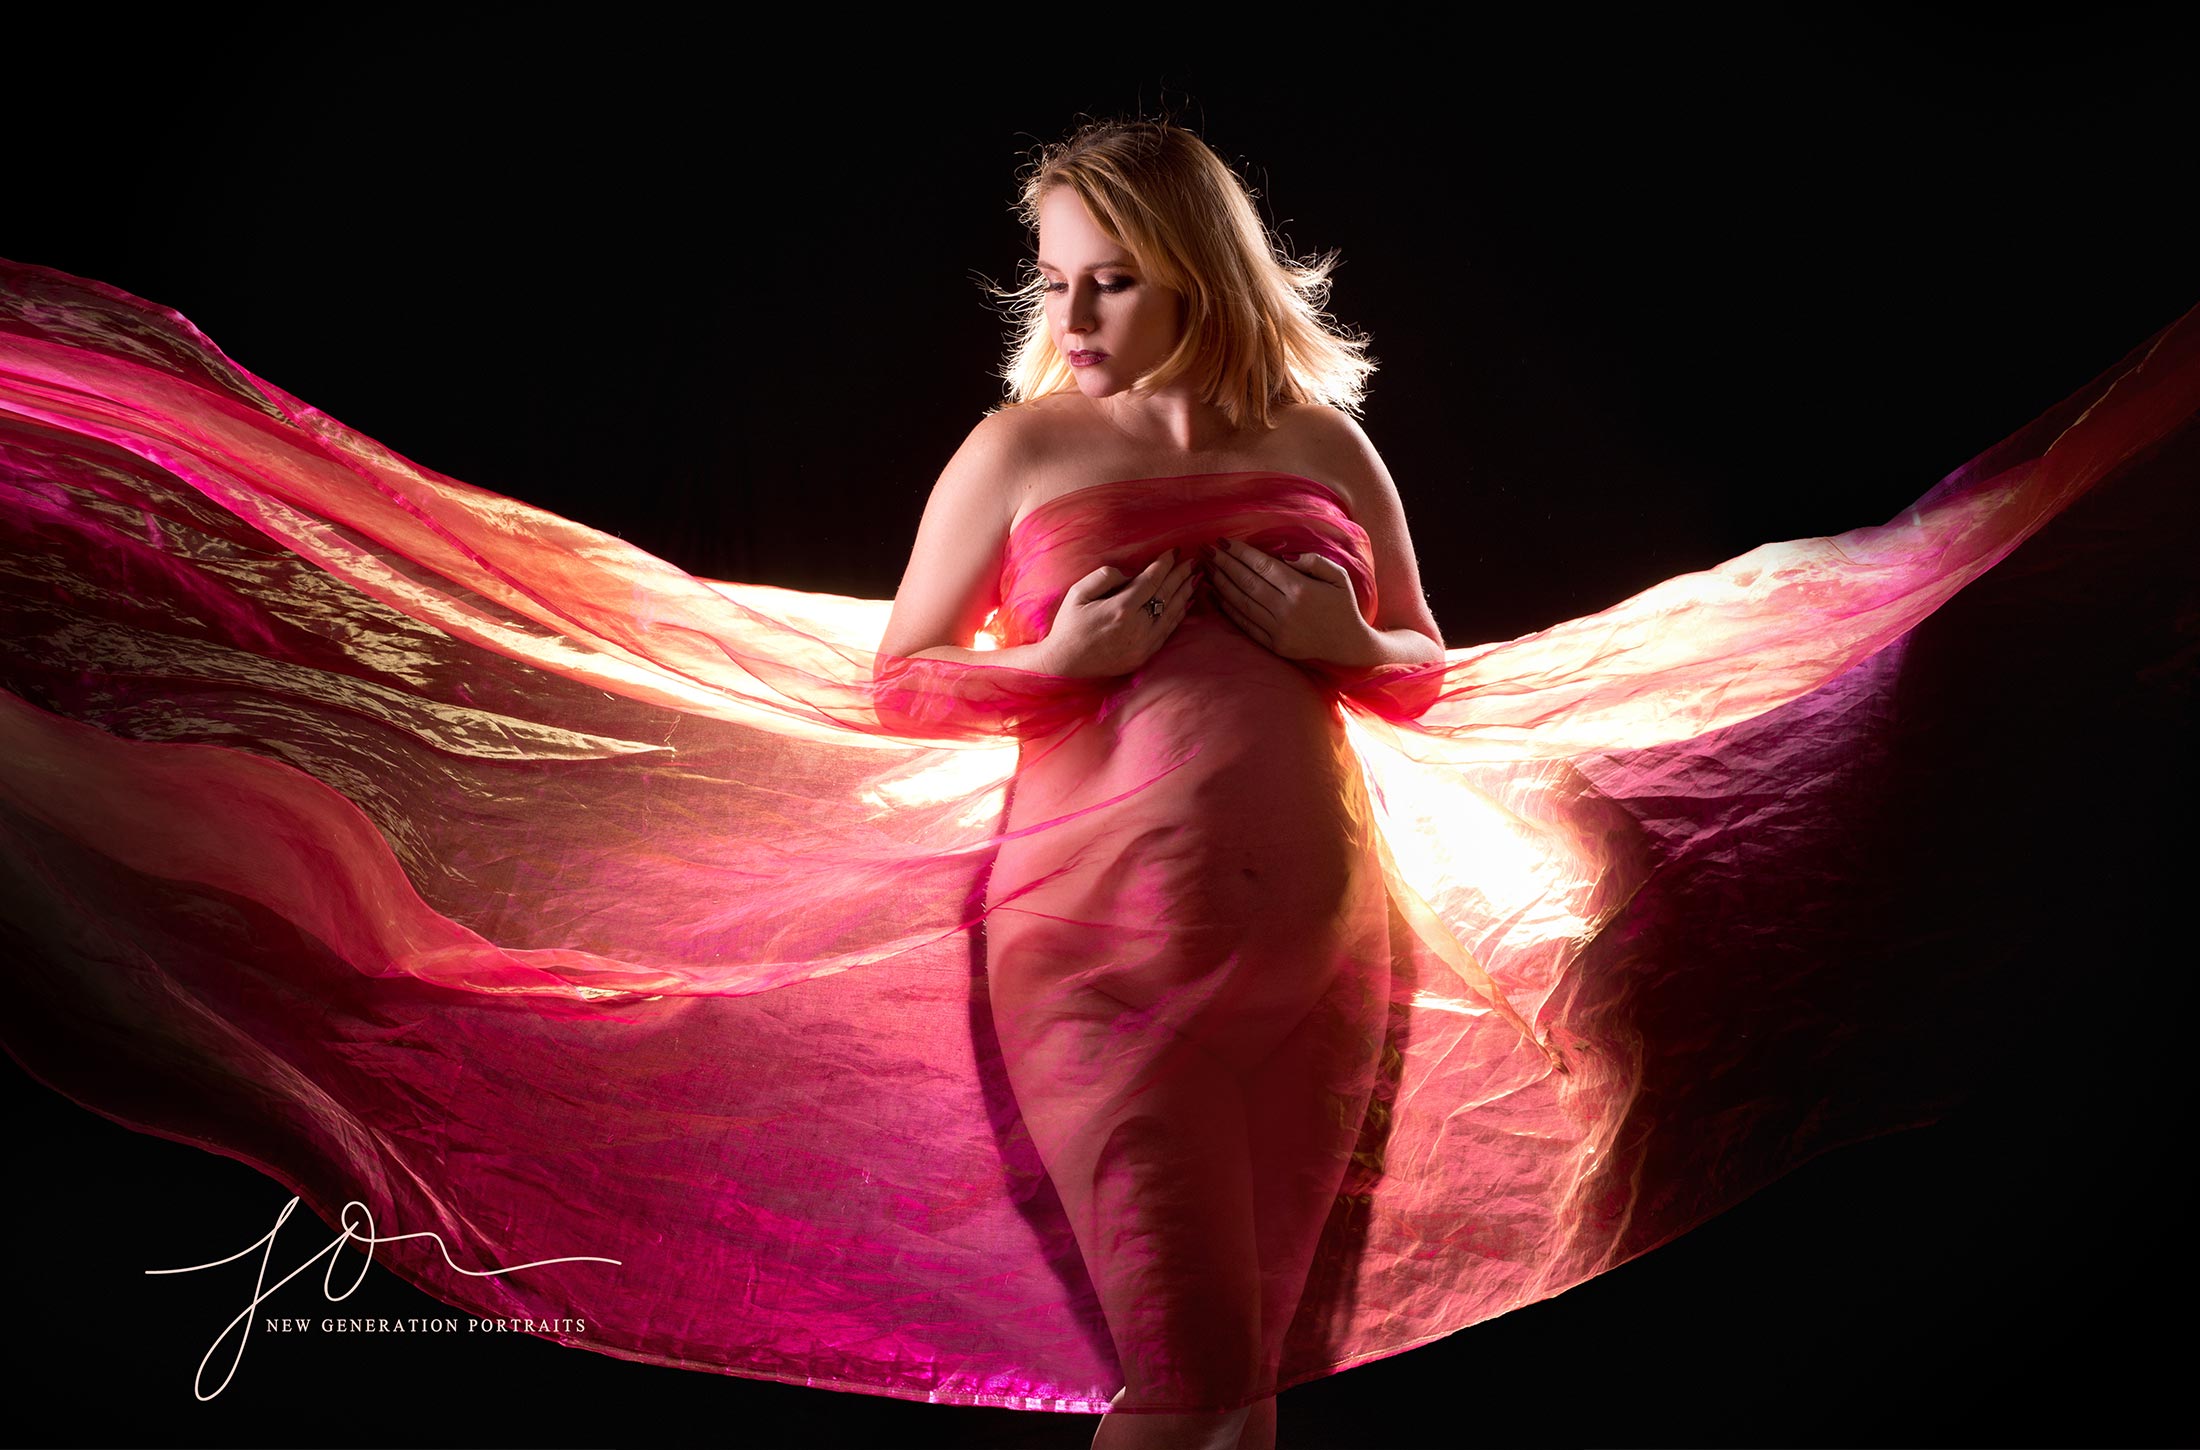 Mum to be covered in red fabric back lit. Pregnancy Boudoir Photography Shoot